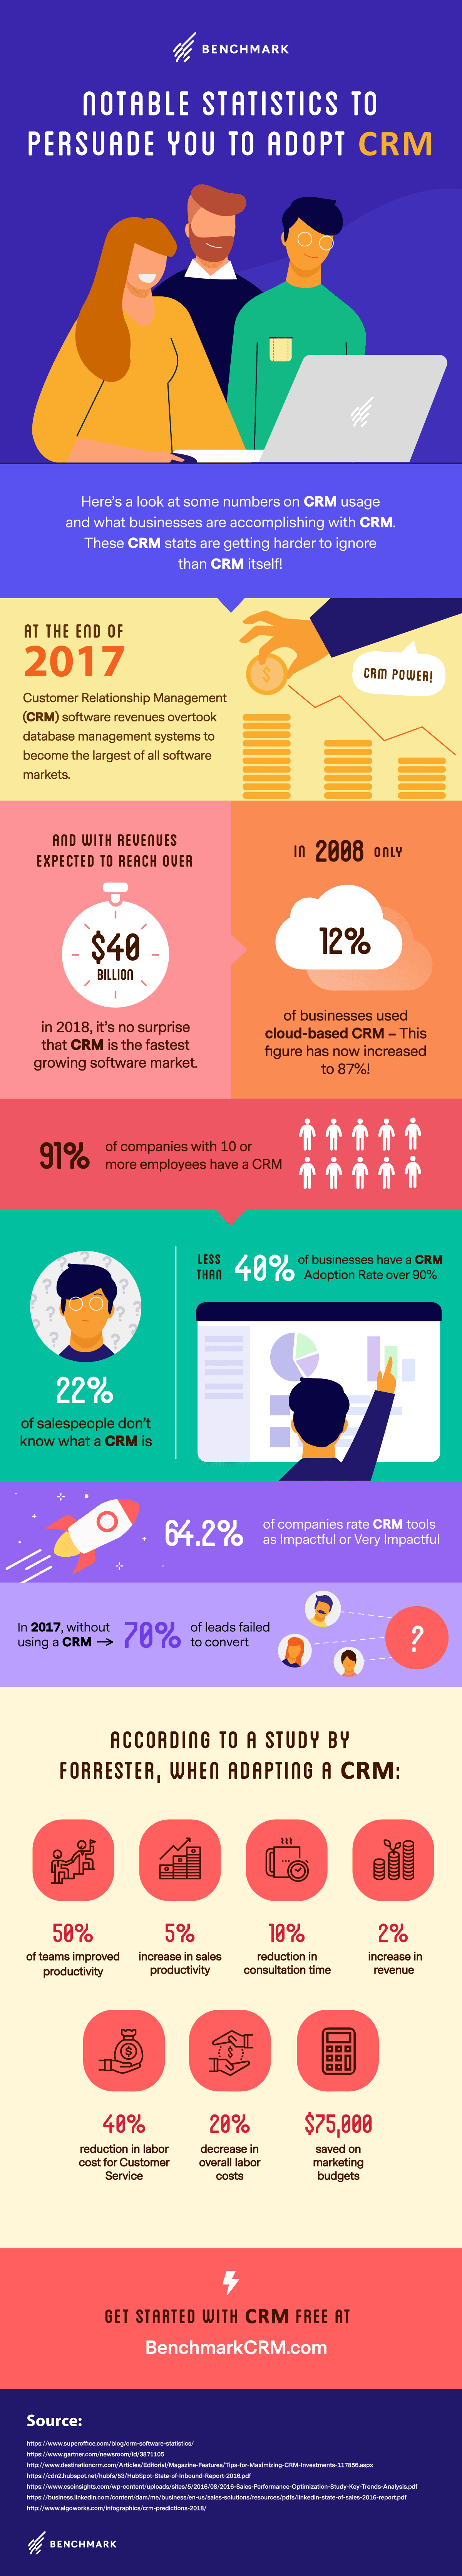 Infographic: Why Adopt CRM